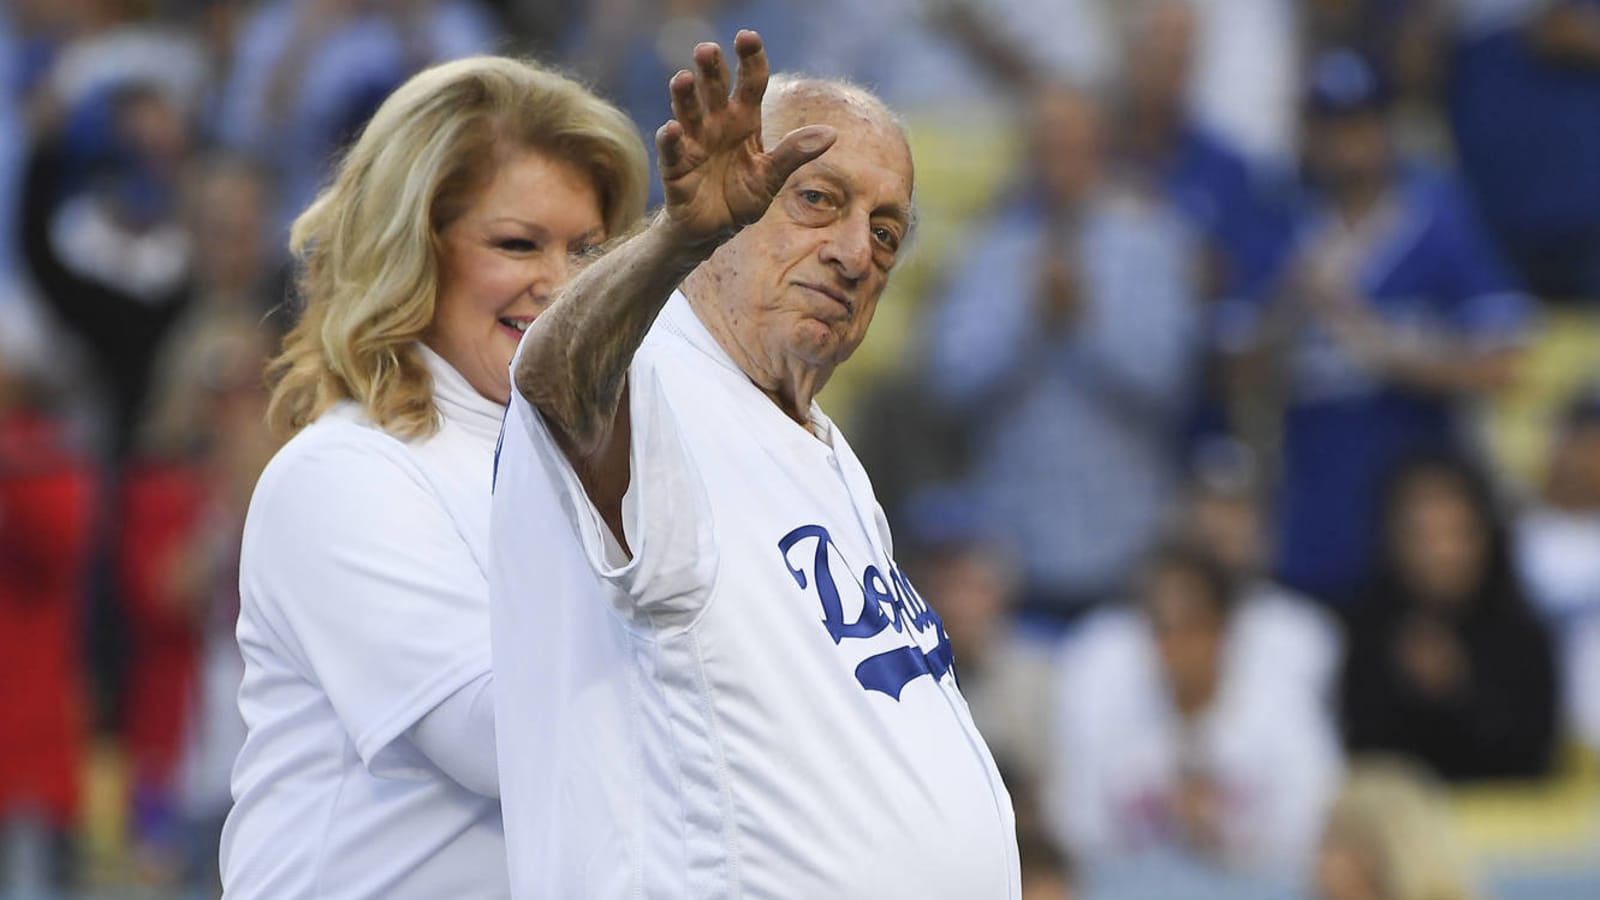 Sports world pays tribute to Dodgers icon Tommy Lasorda